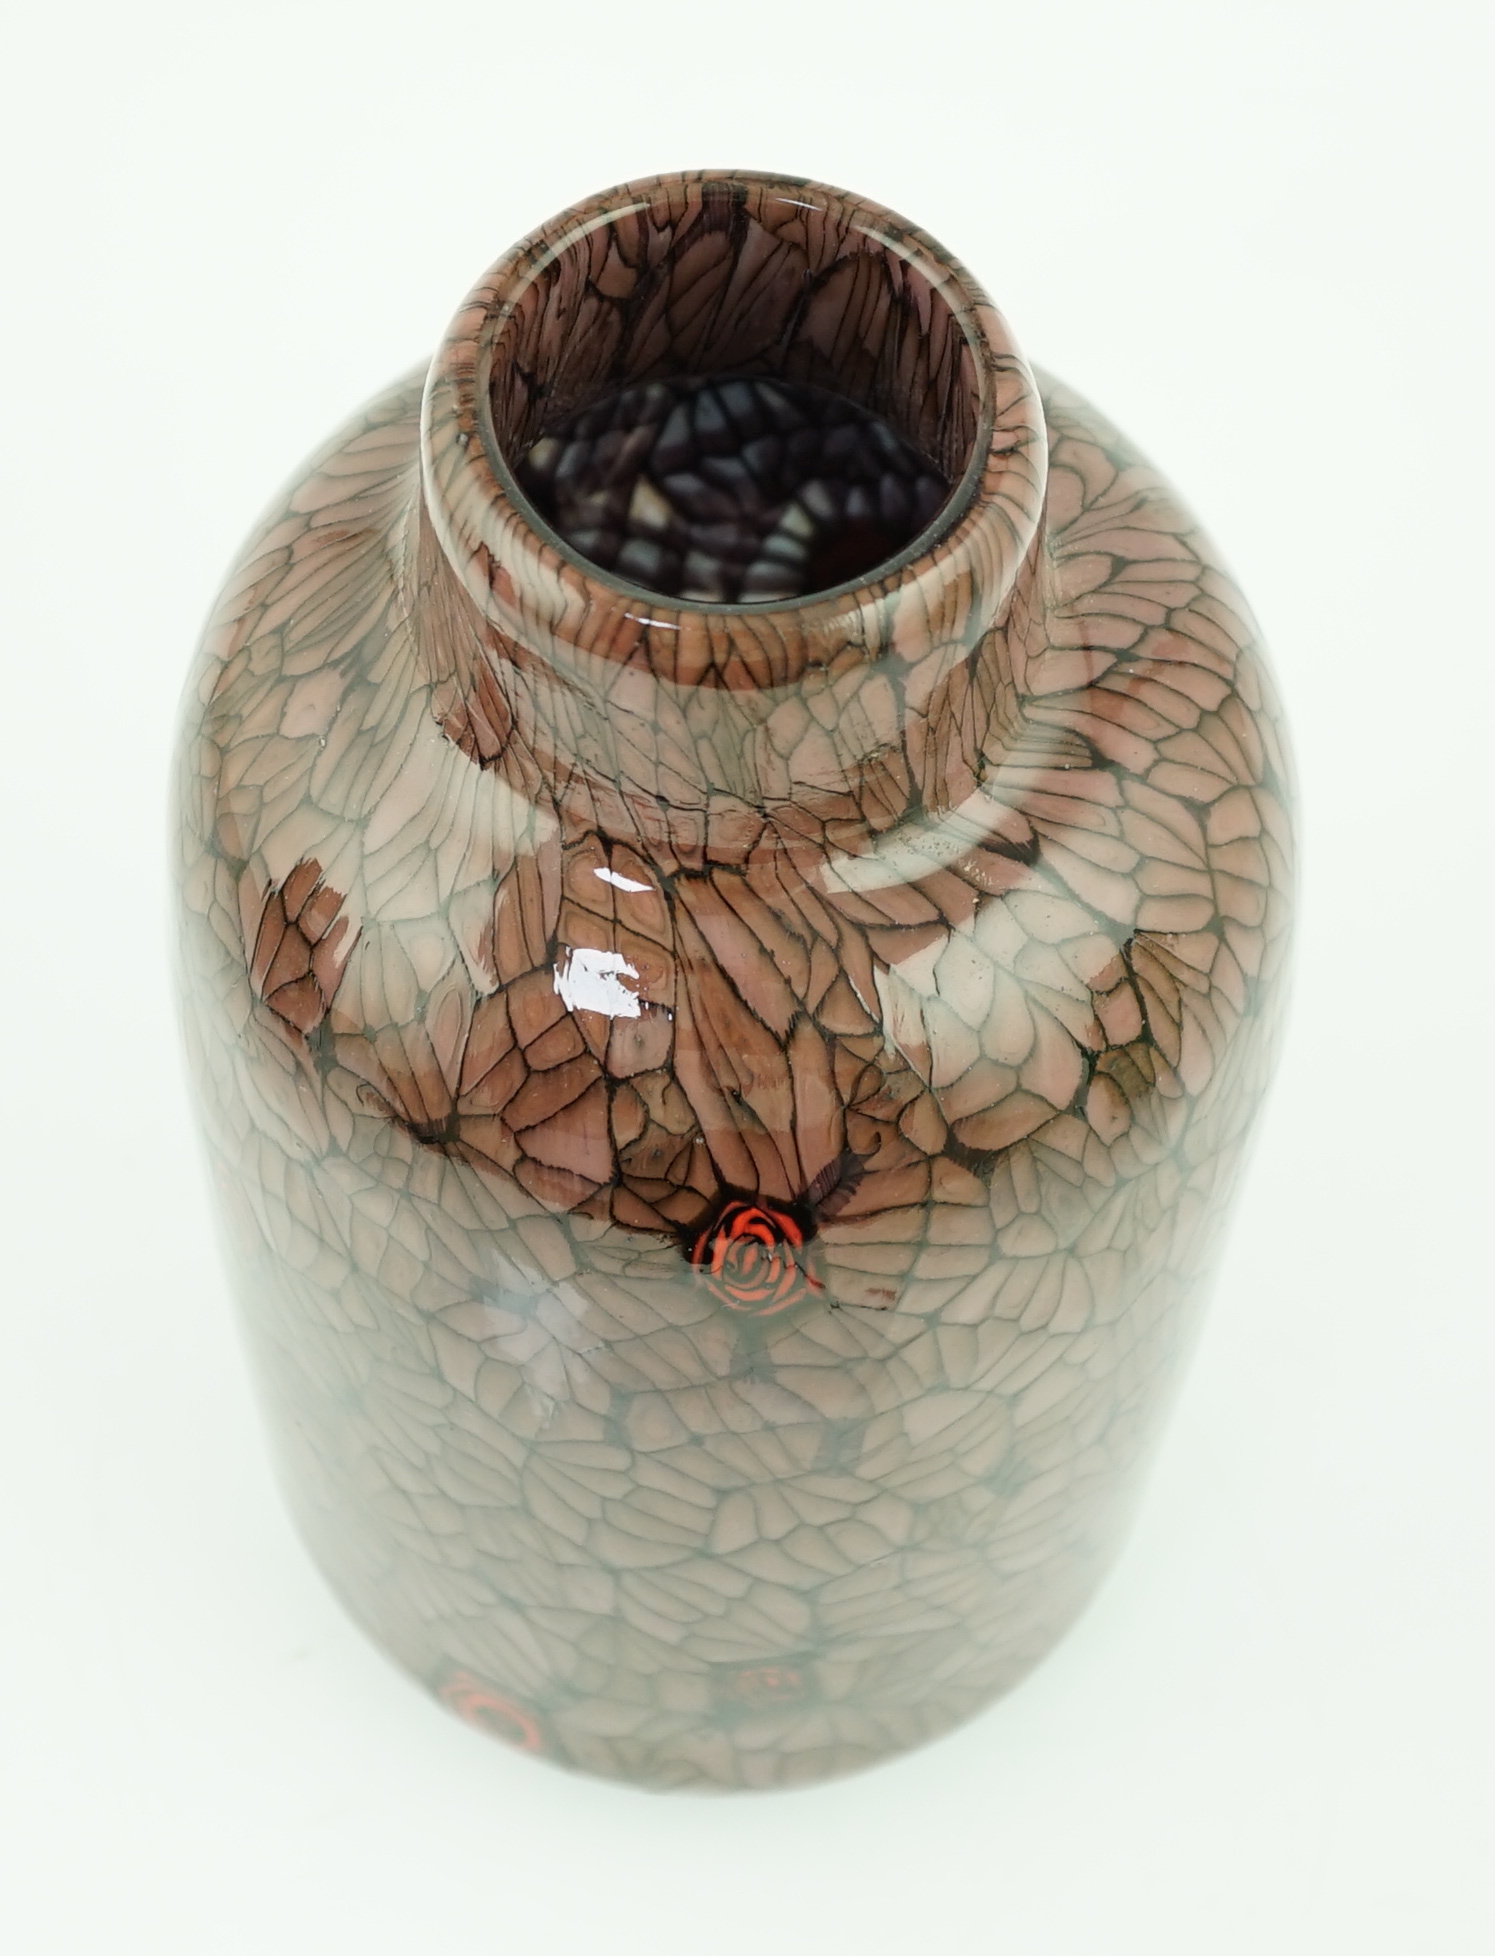 Vittorio Ferro (1932-2012) A Murano glass Murrine vase, the red brown ground with scattered red roses, unsigned, 27cm, Please note this lot attracts an additional import tax of 20% on the hammer price